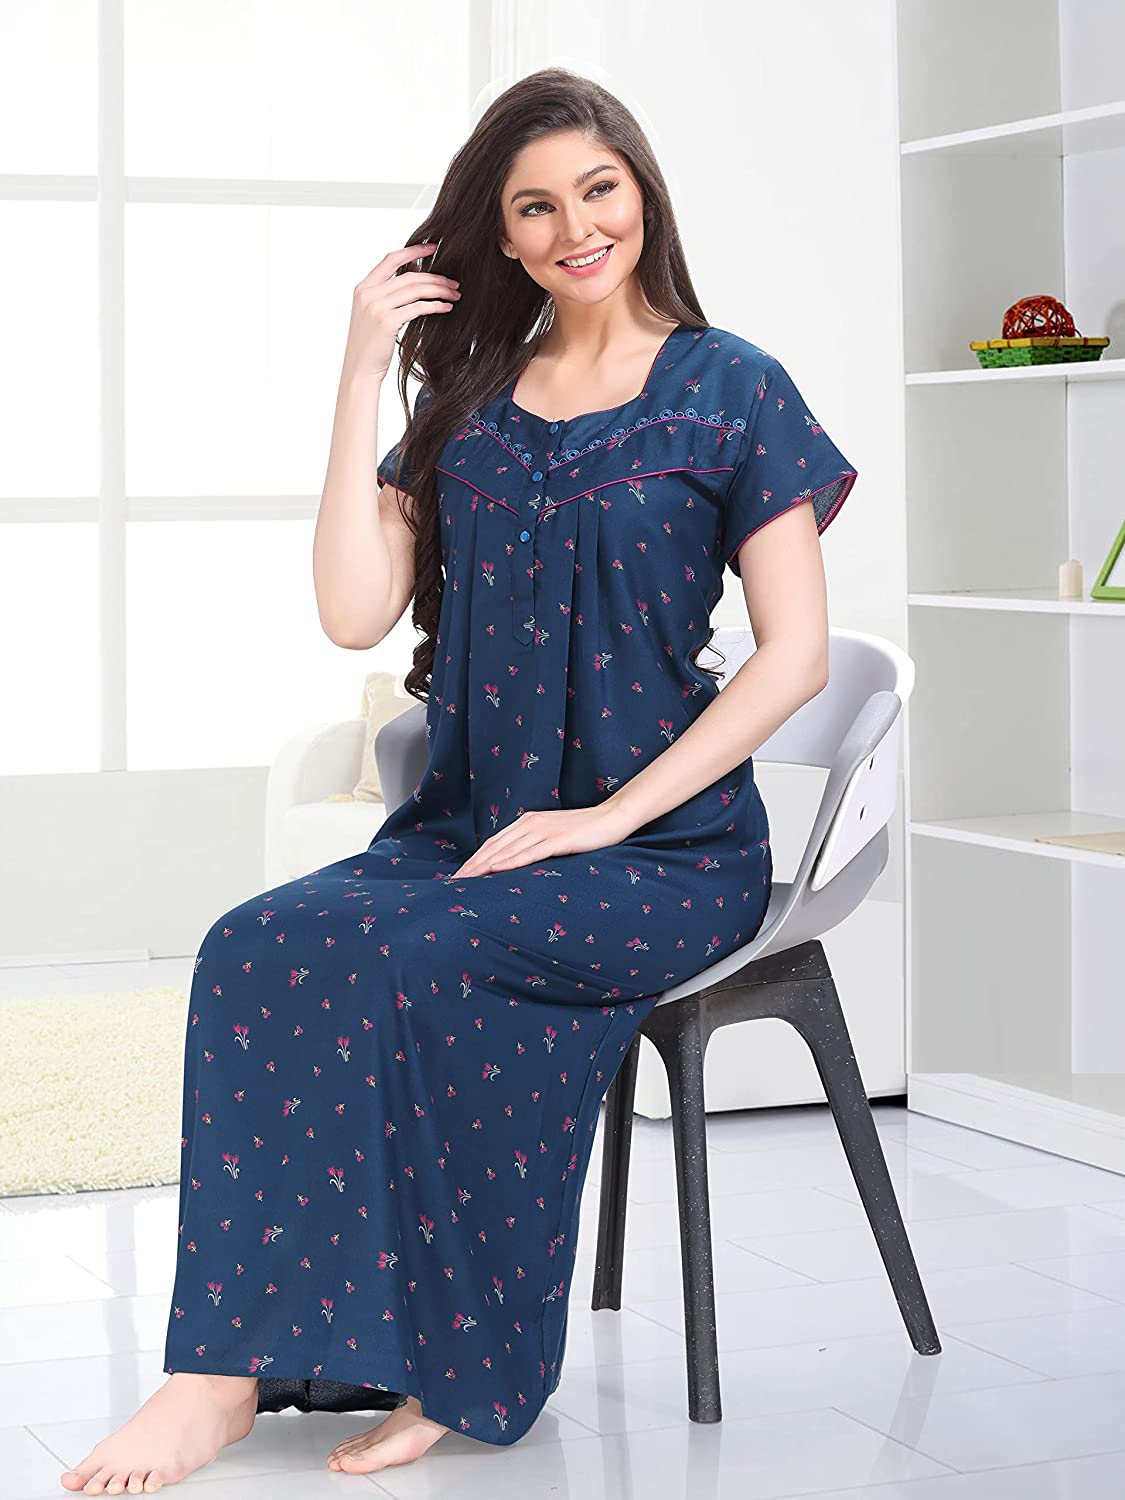 Tiger Queen - Women's Organic Cotton Back to Bed Nightgown - Navy